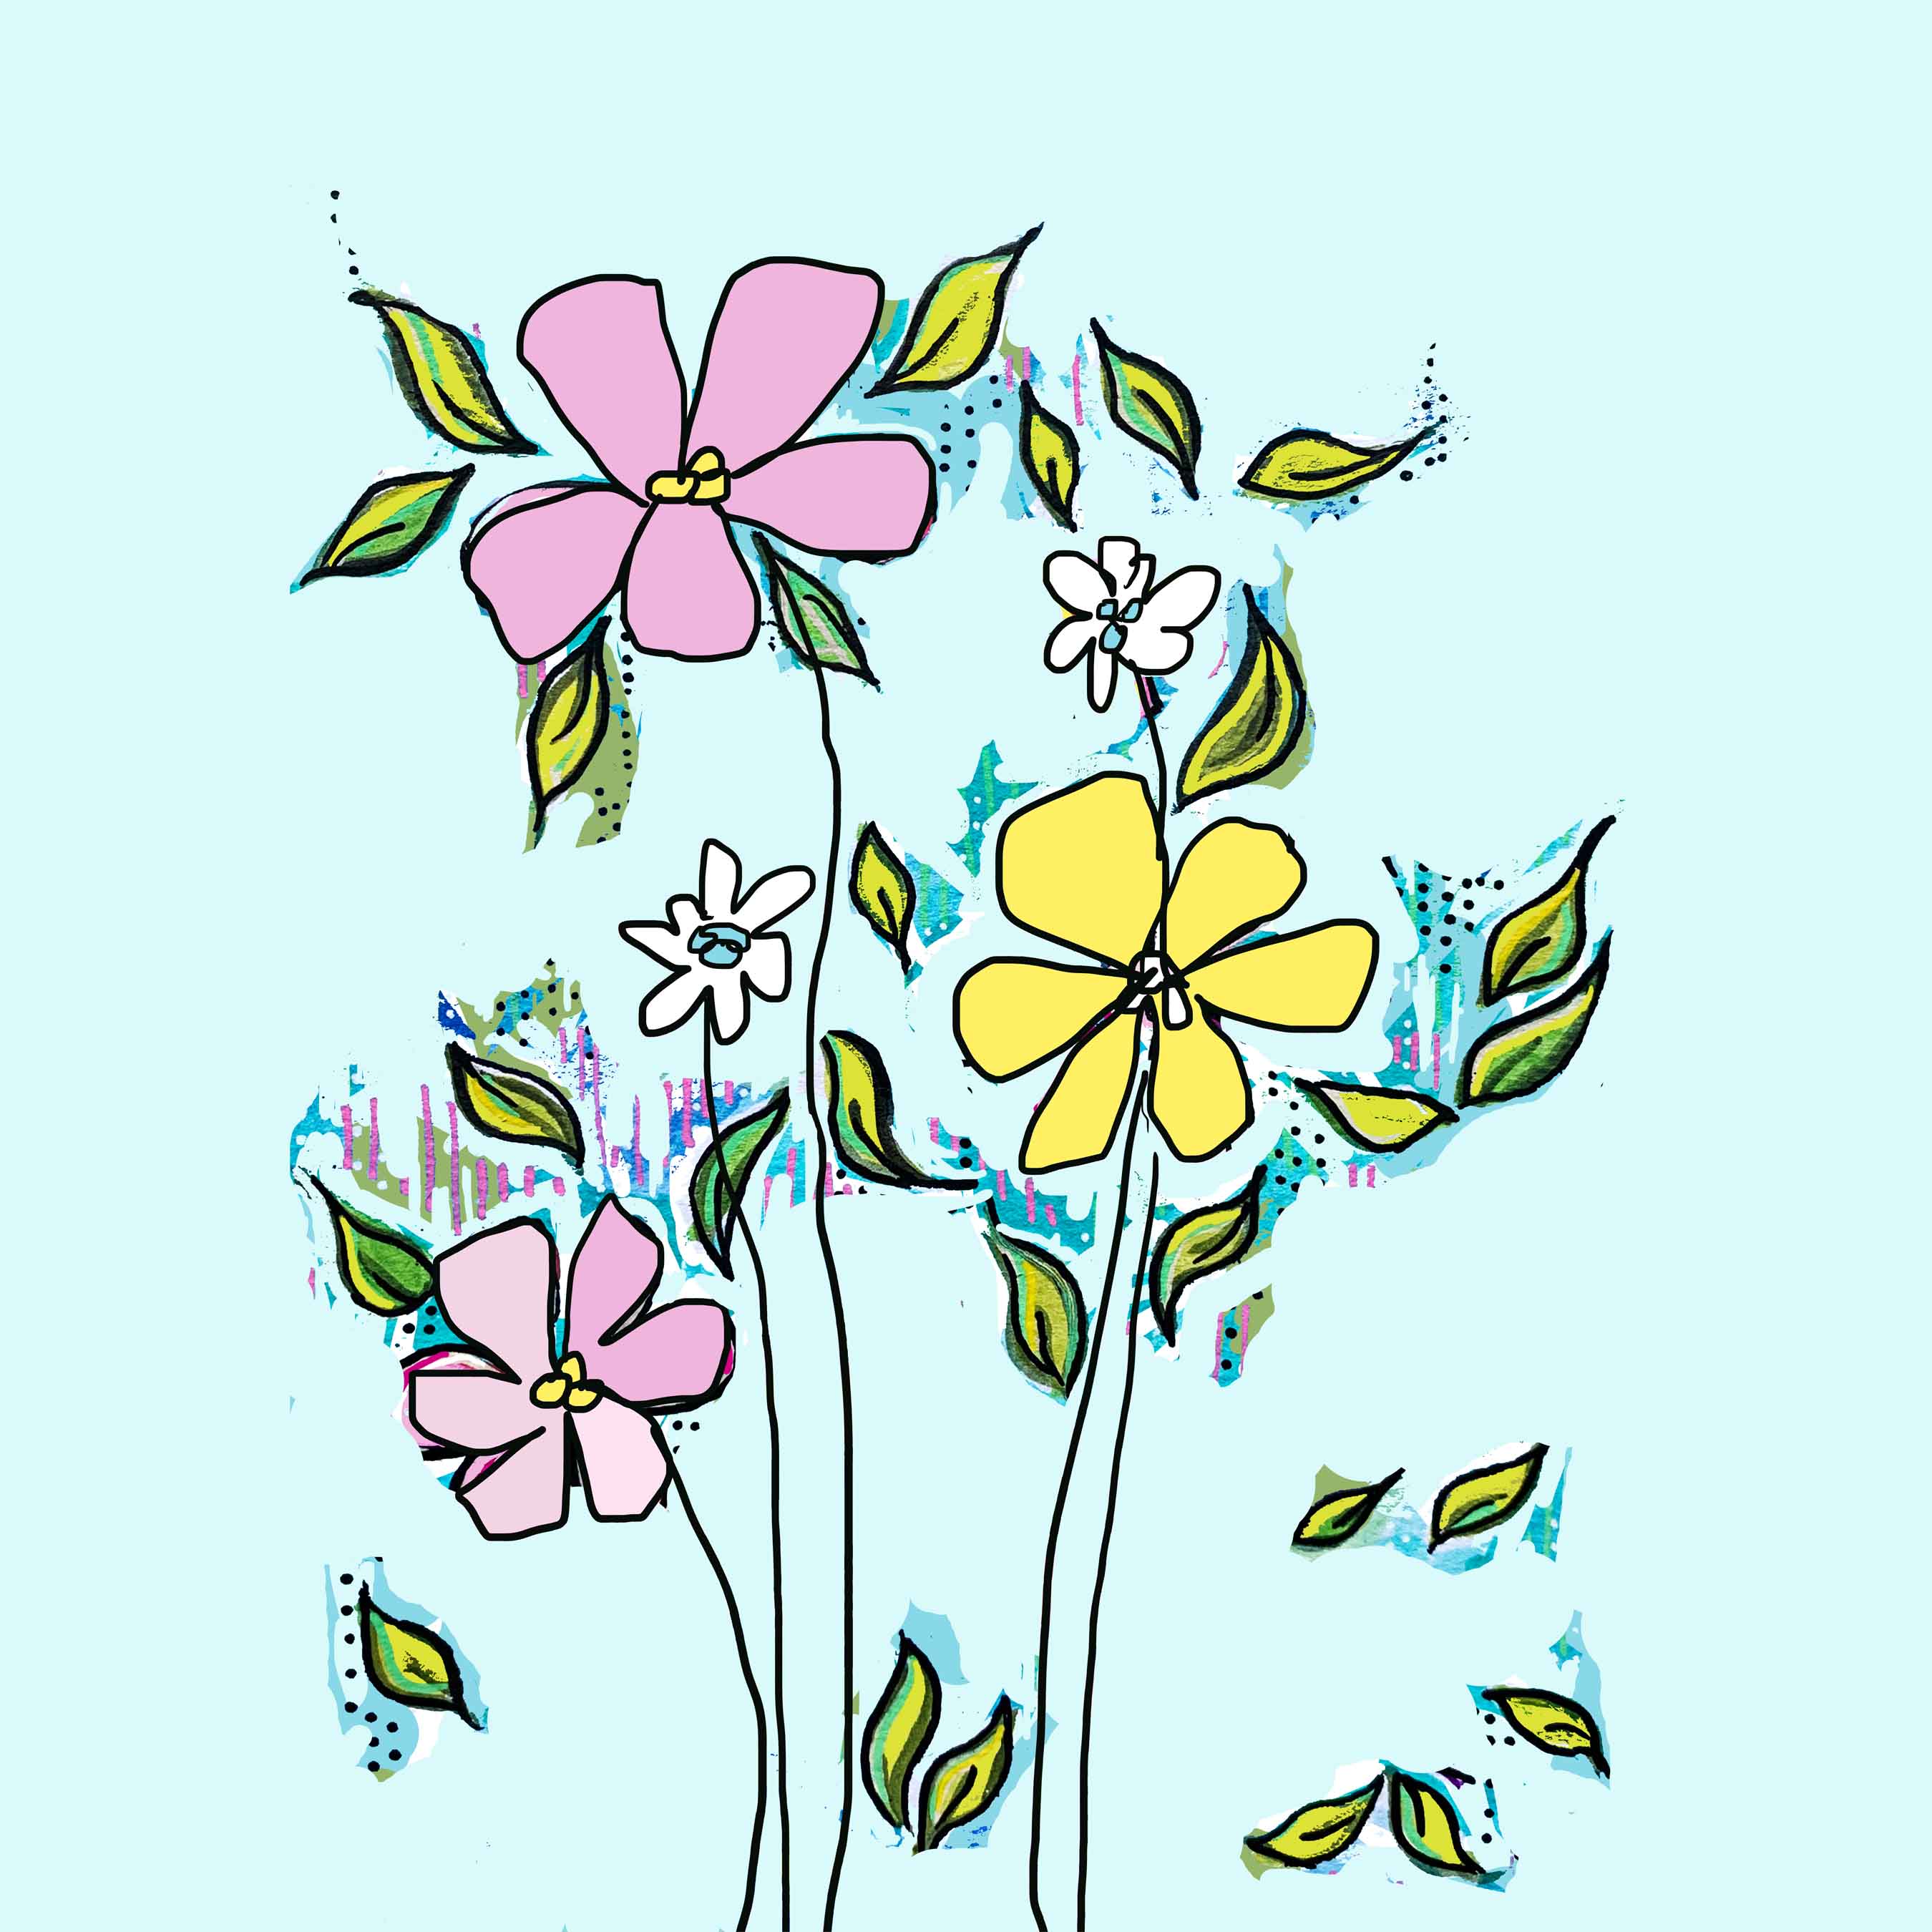 art every day number 607 / illustration / five flowers